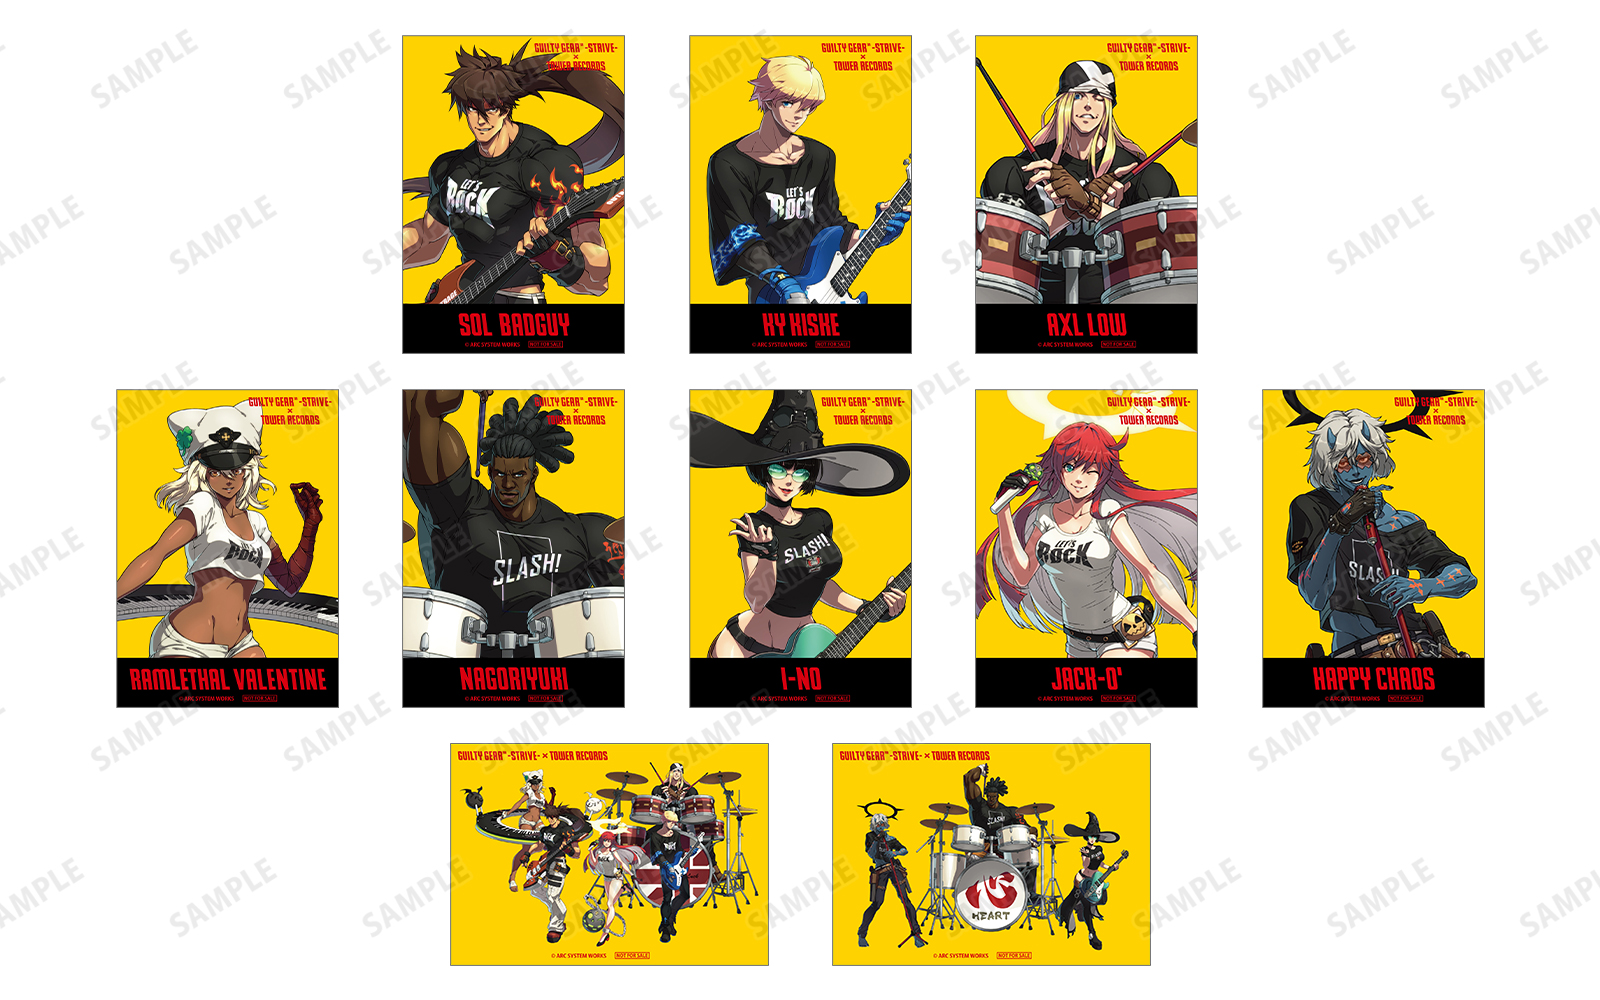 Guilty Gear Strive Tower Record Pop-Upp Shop Reappears - Siliconera